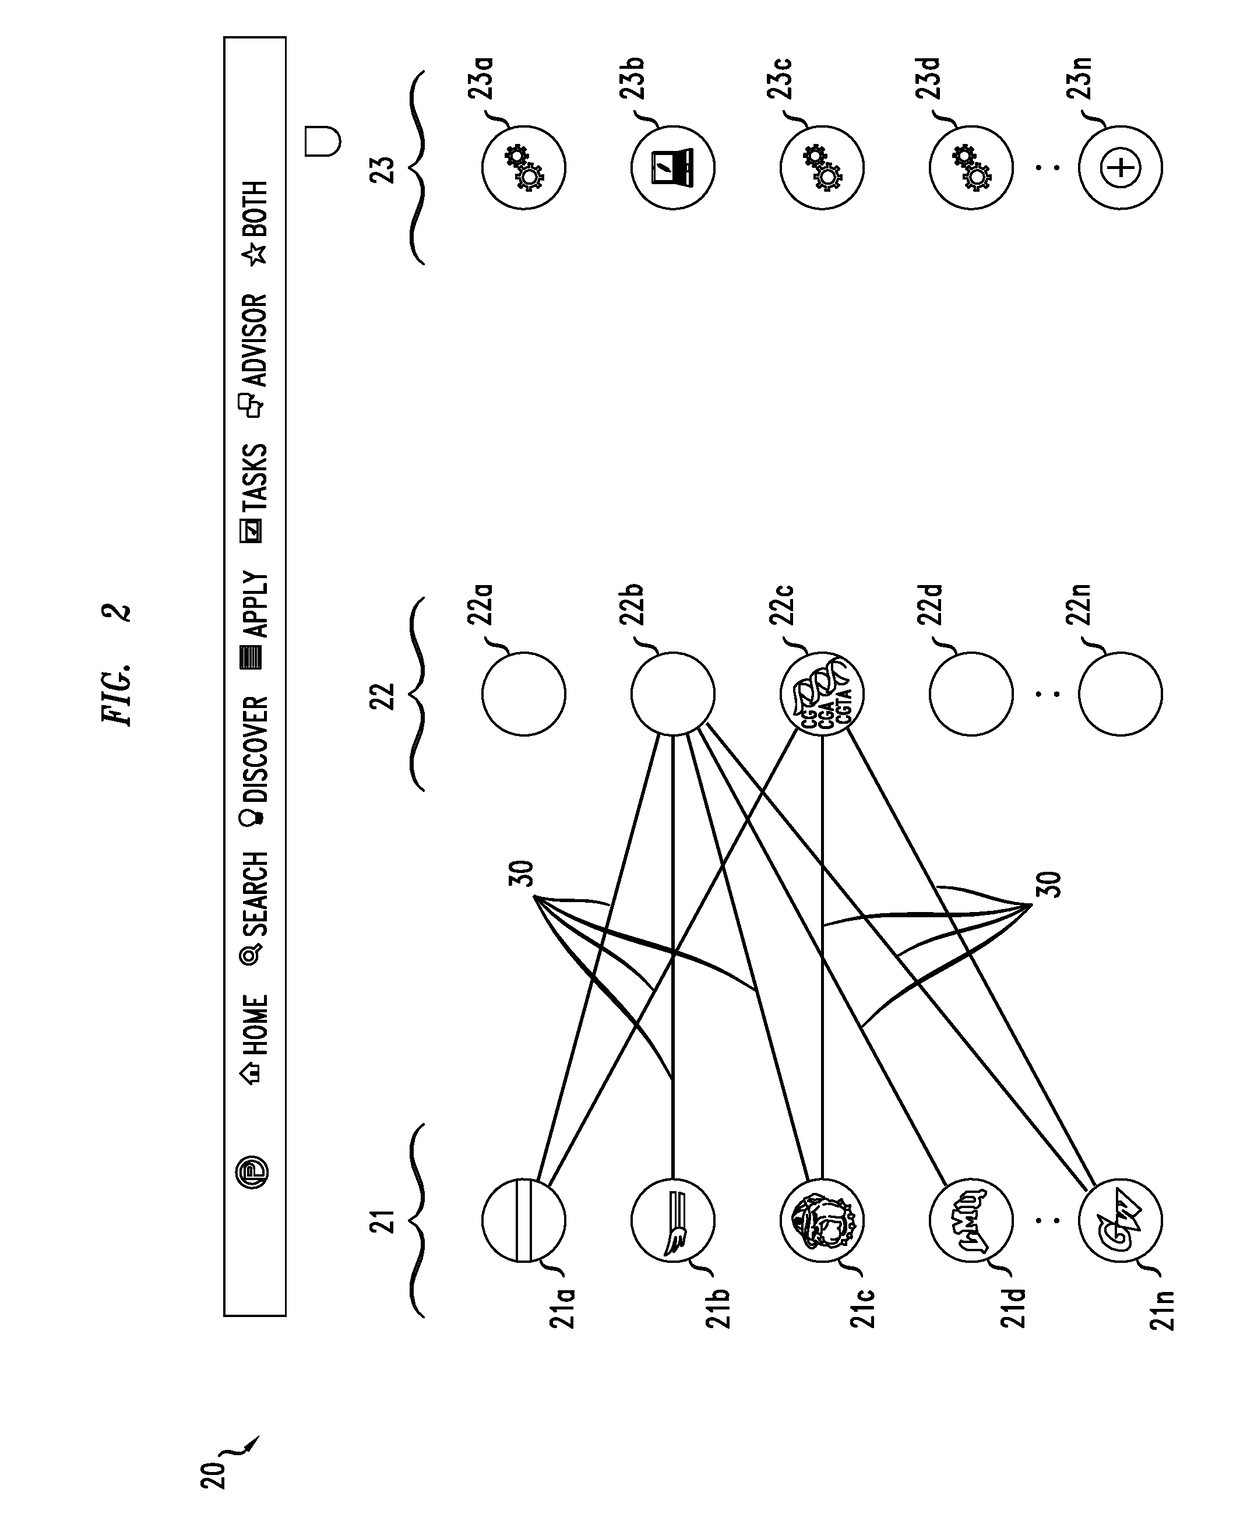 Systems and Methods for Simultaneously Visualizing Academic and Career Interrelationship Arrays